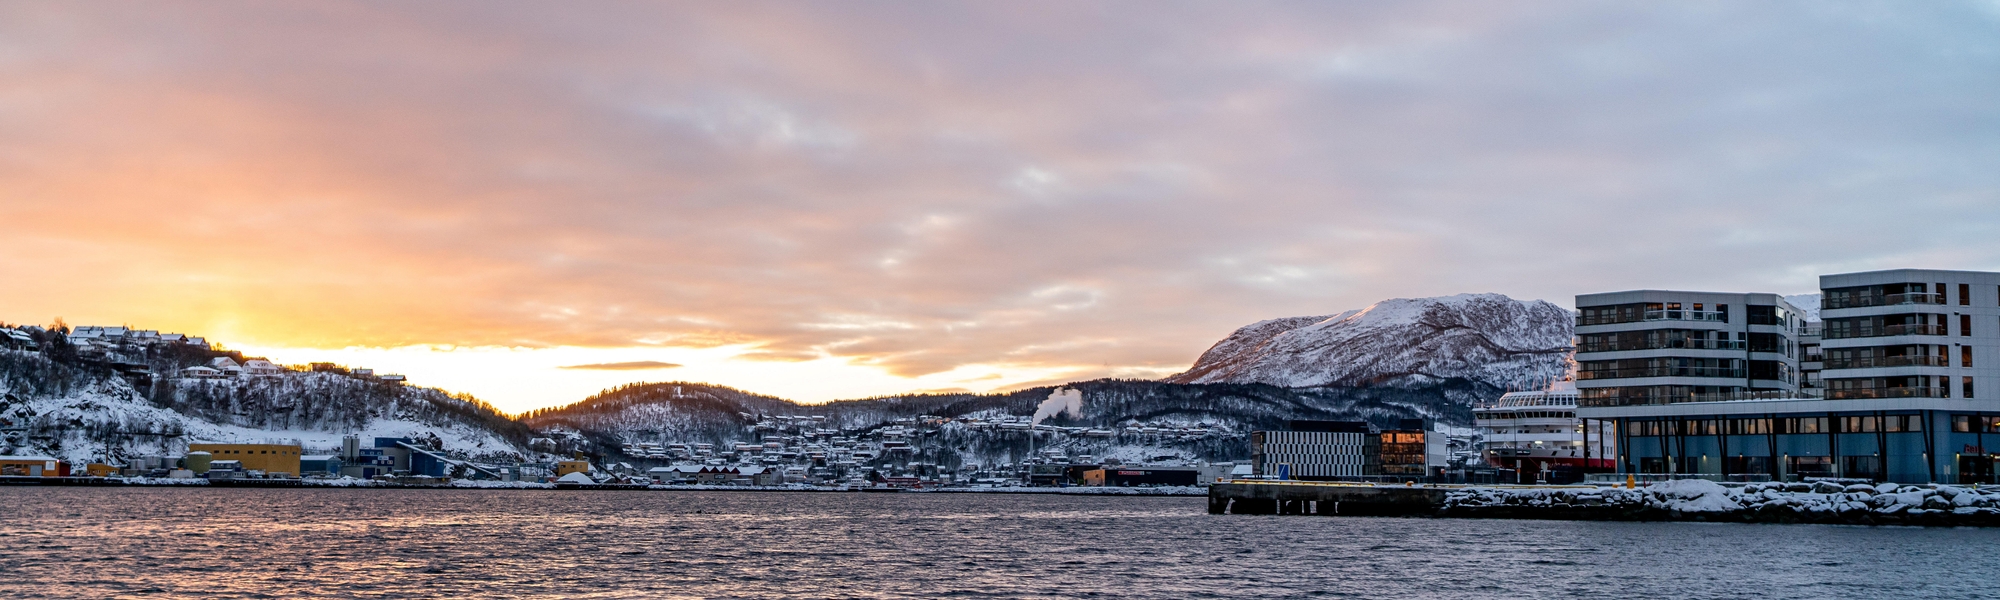 The Equinor office in Harstad, seen from the seaside. The picture is taken in winter just before sunset, with a snowy landscape in the background